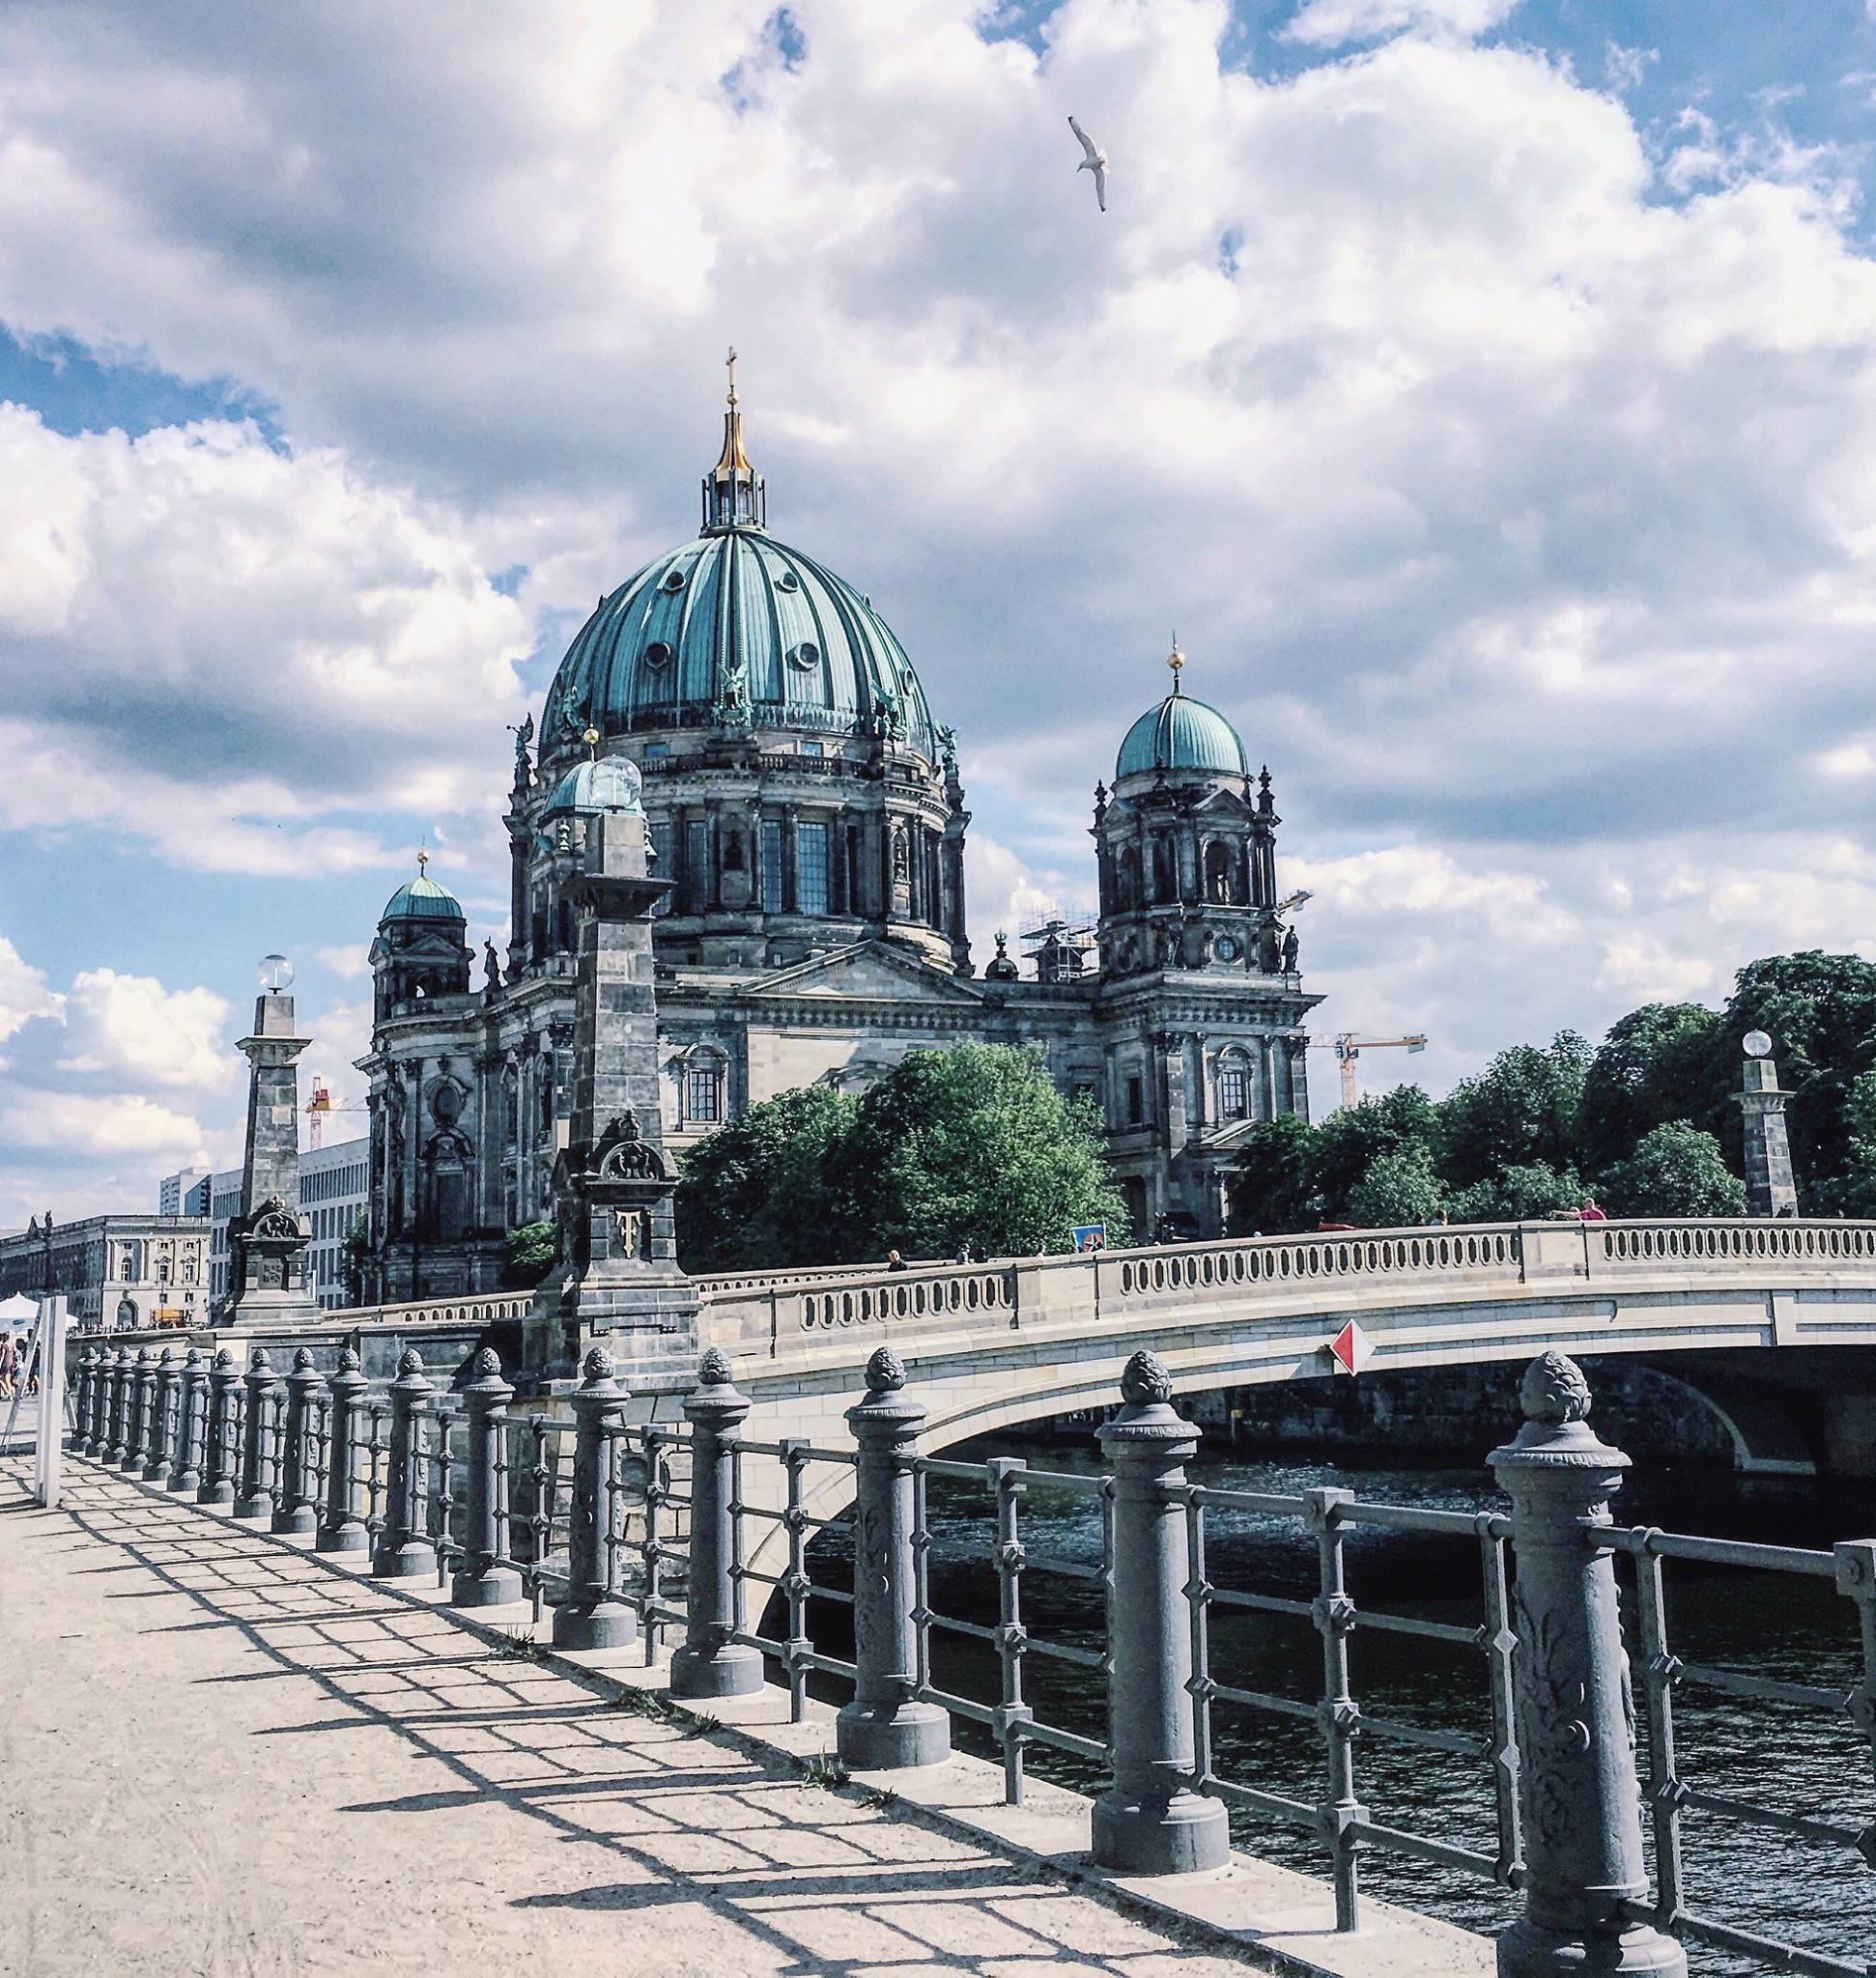 Phuong Nguyen, Germany: "One of the best cities #Berlin."